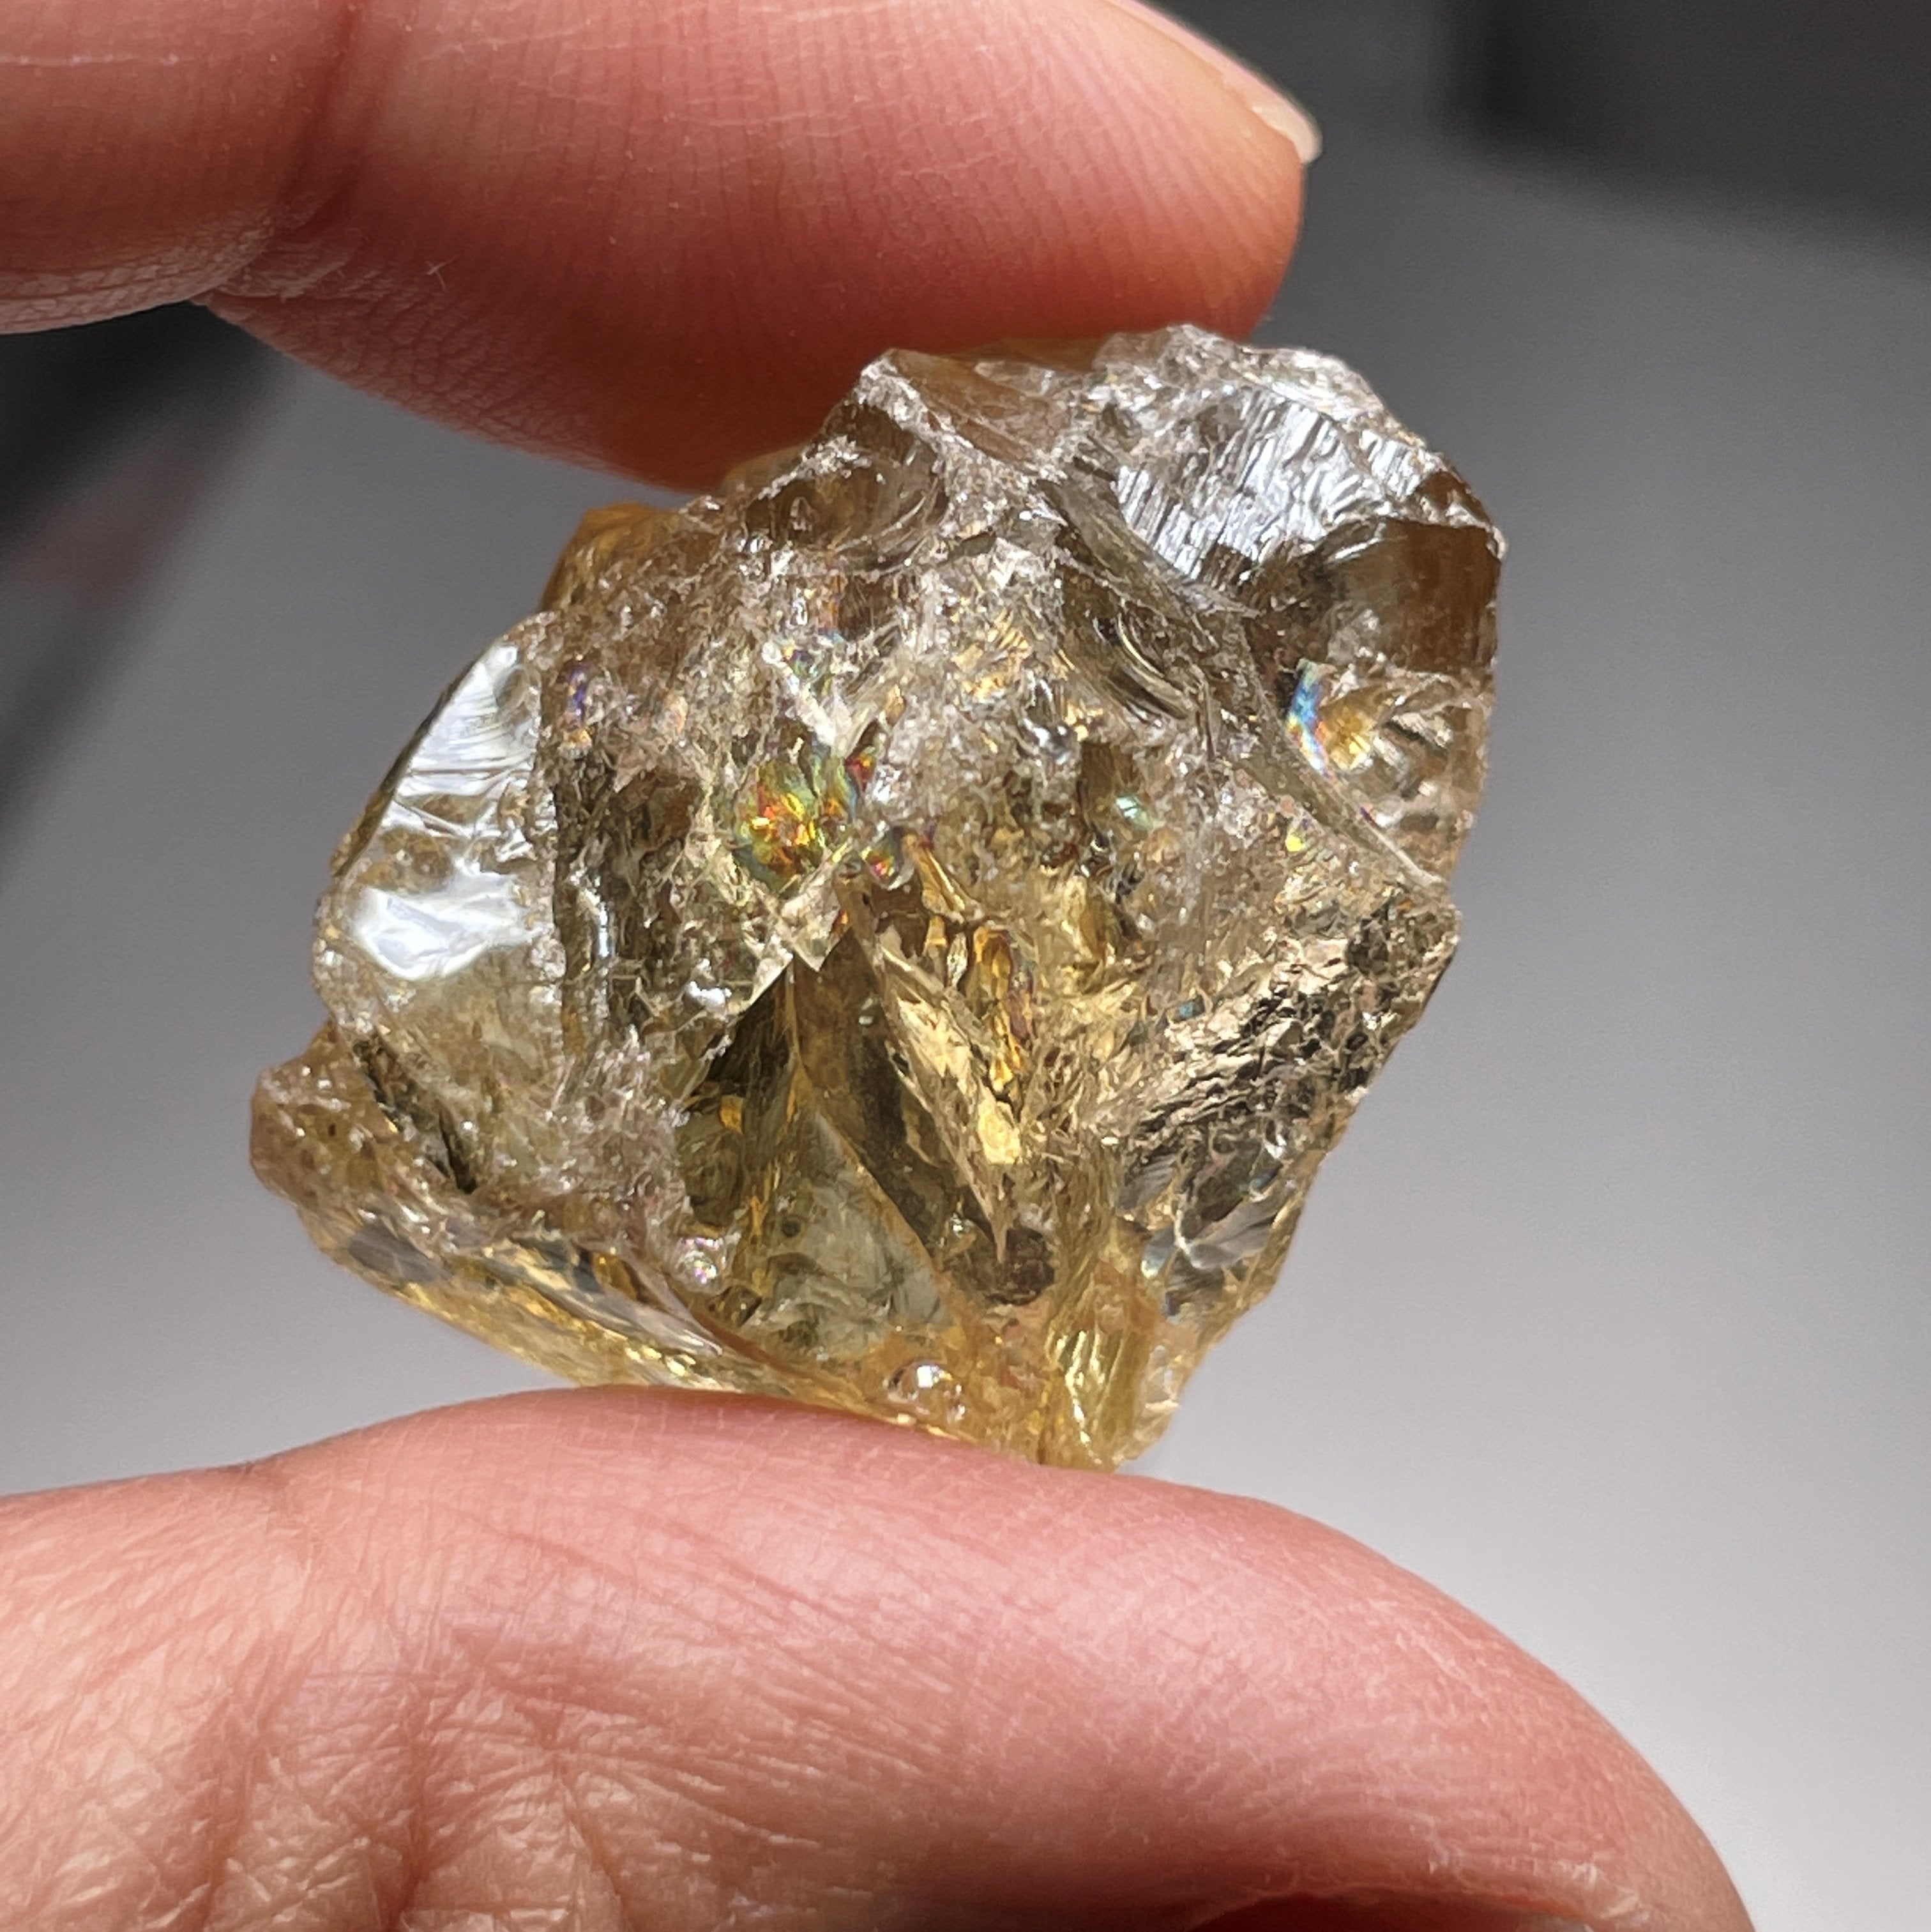 15.21Gm Citrine Zambia. Untreated Unheated. Rare As Not Heated From Amethyst Natural Colour.